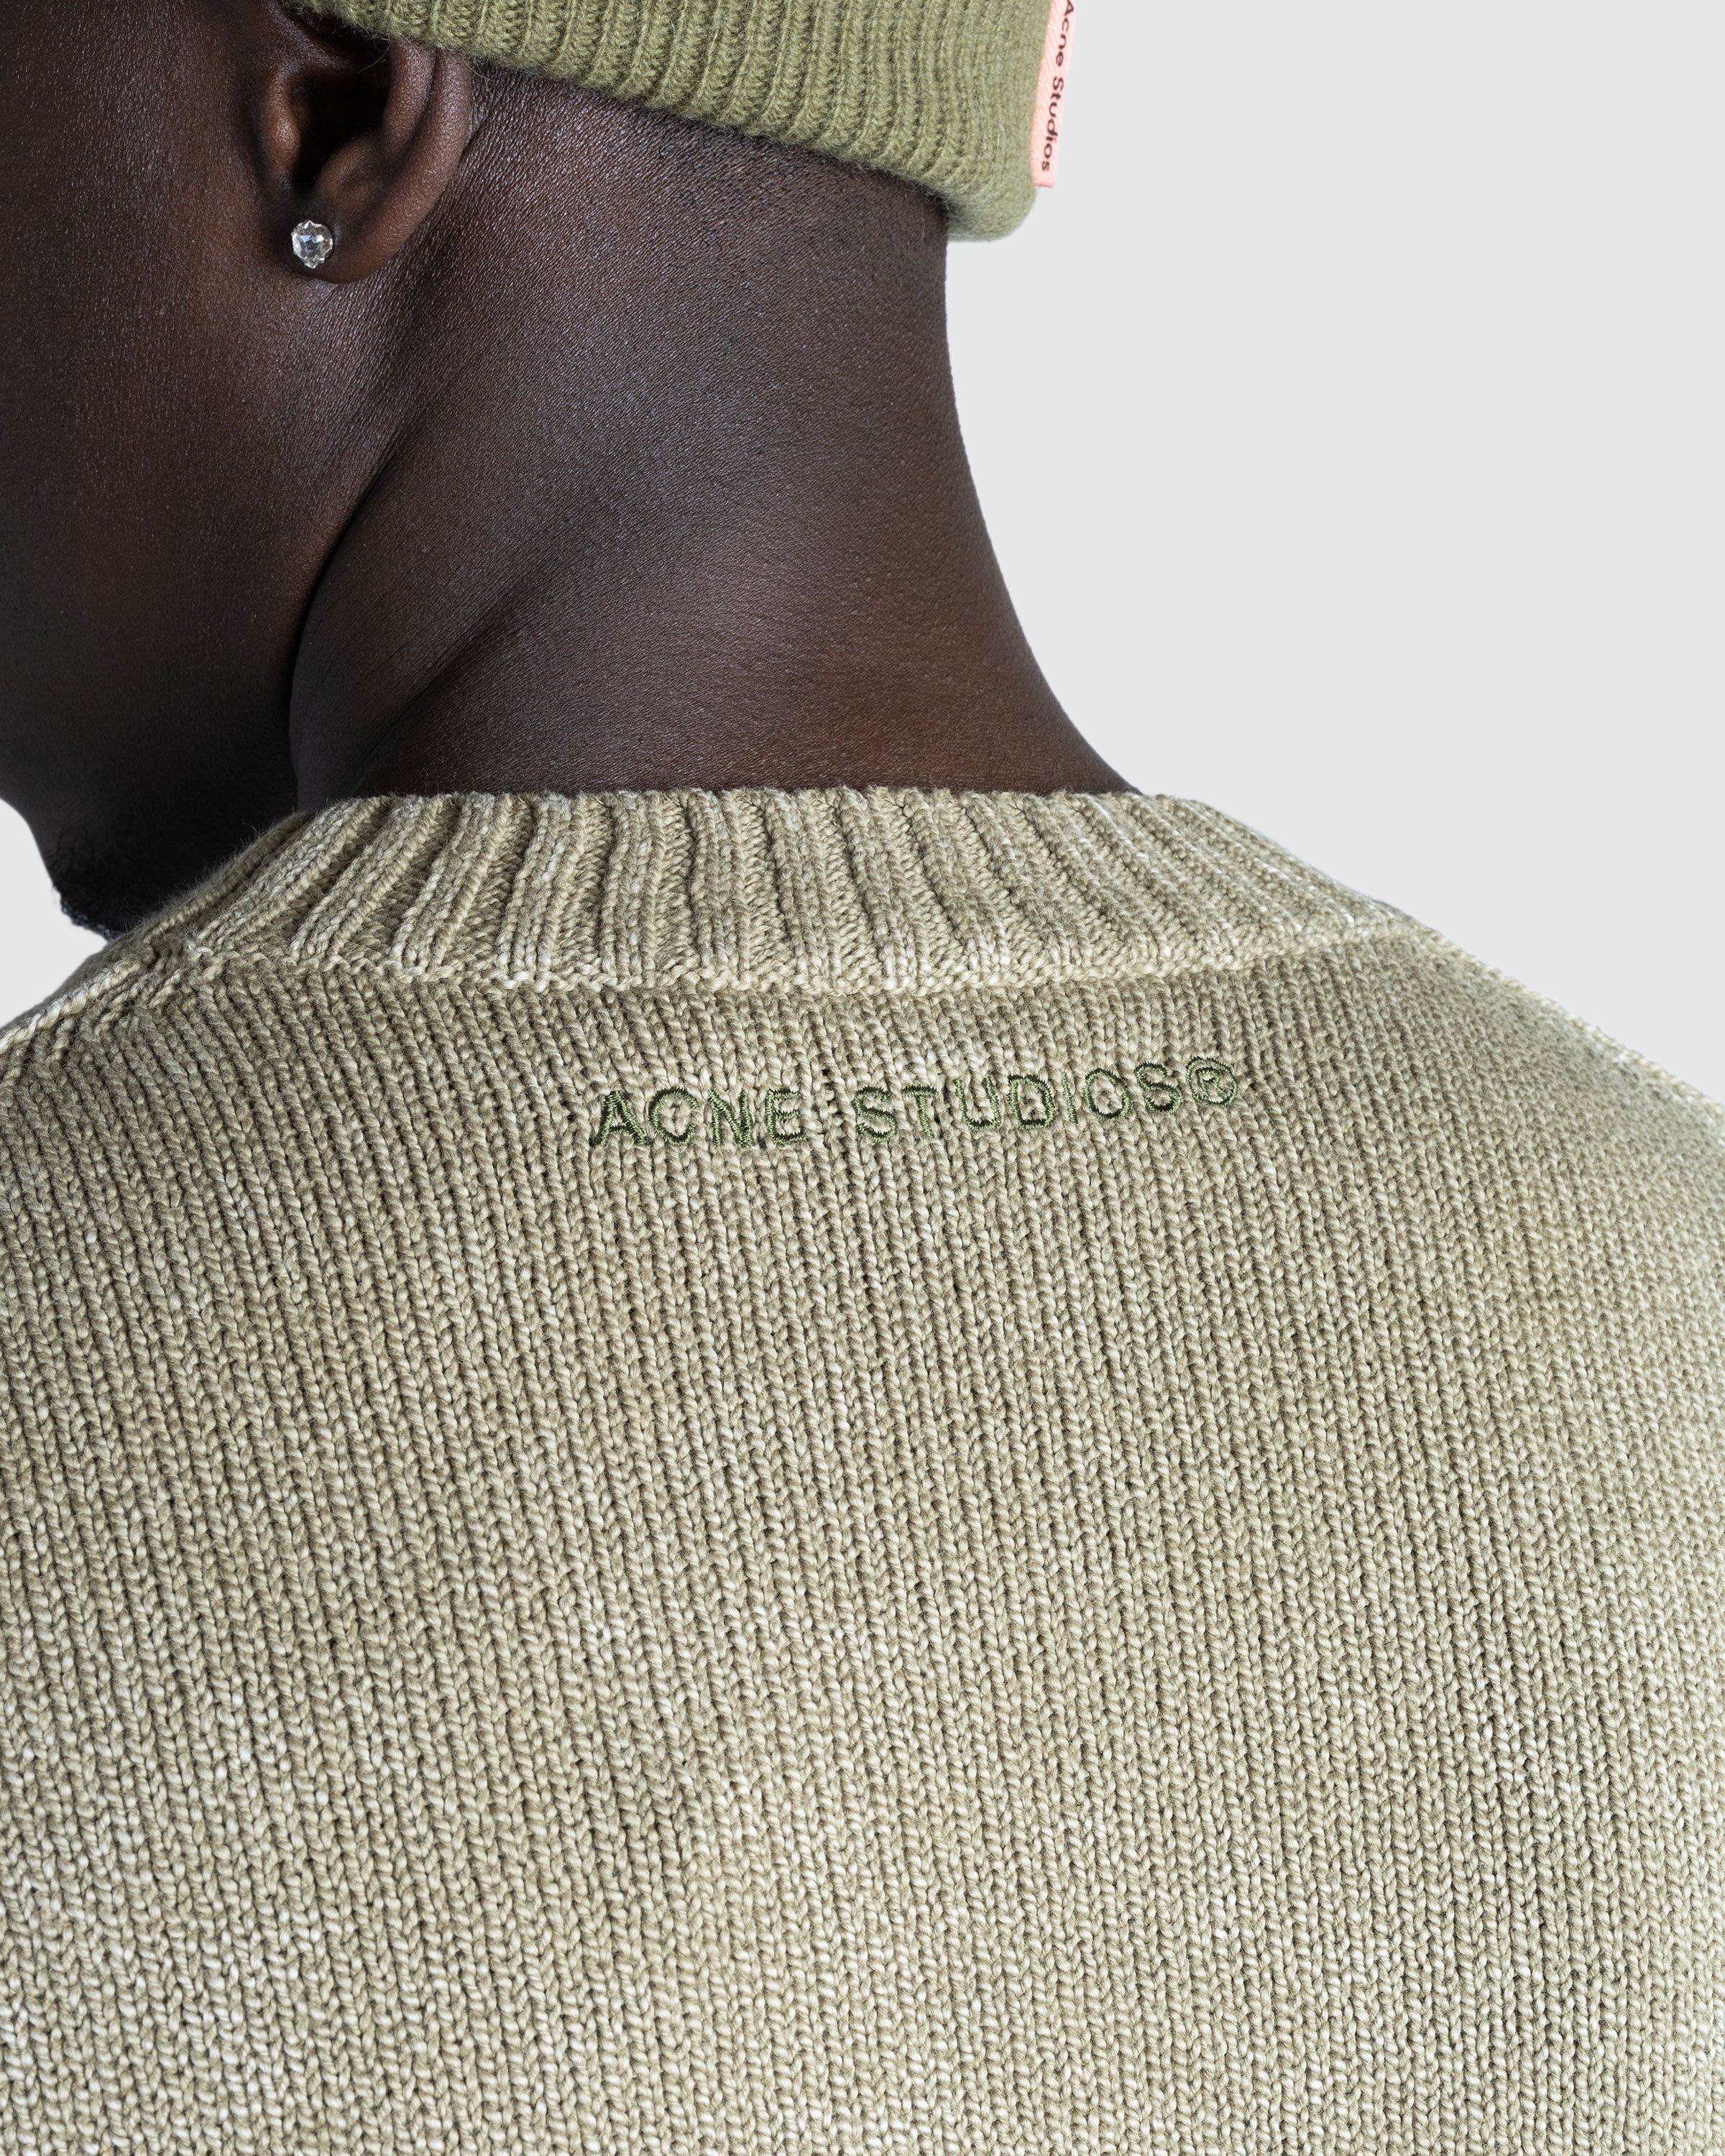 Acne Studios - FN-MN-KNIT000443 Olive Green - Clothing - Green - Image 5